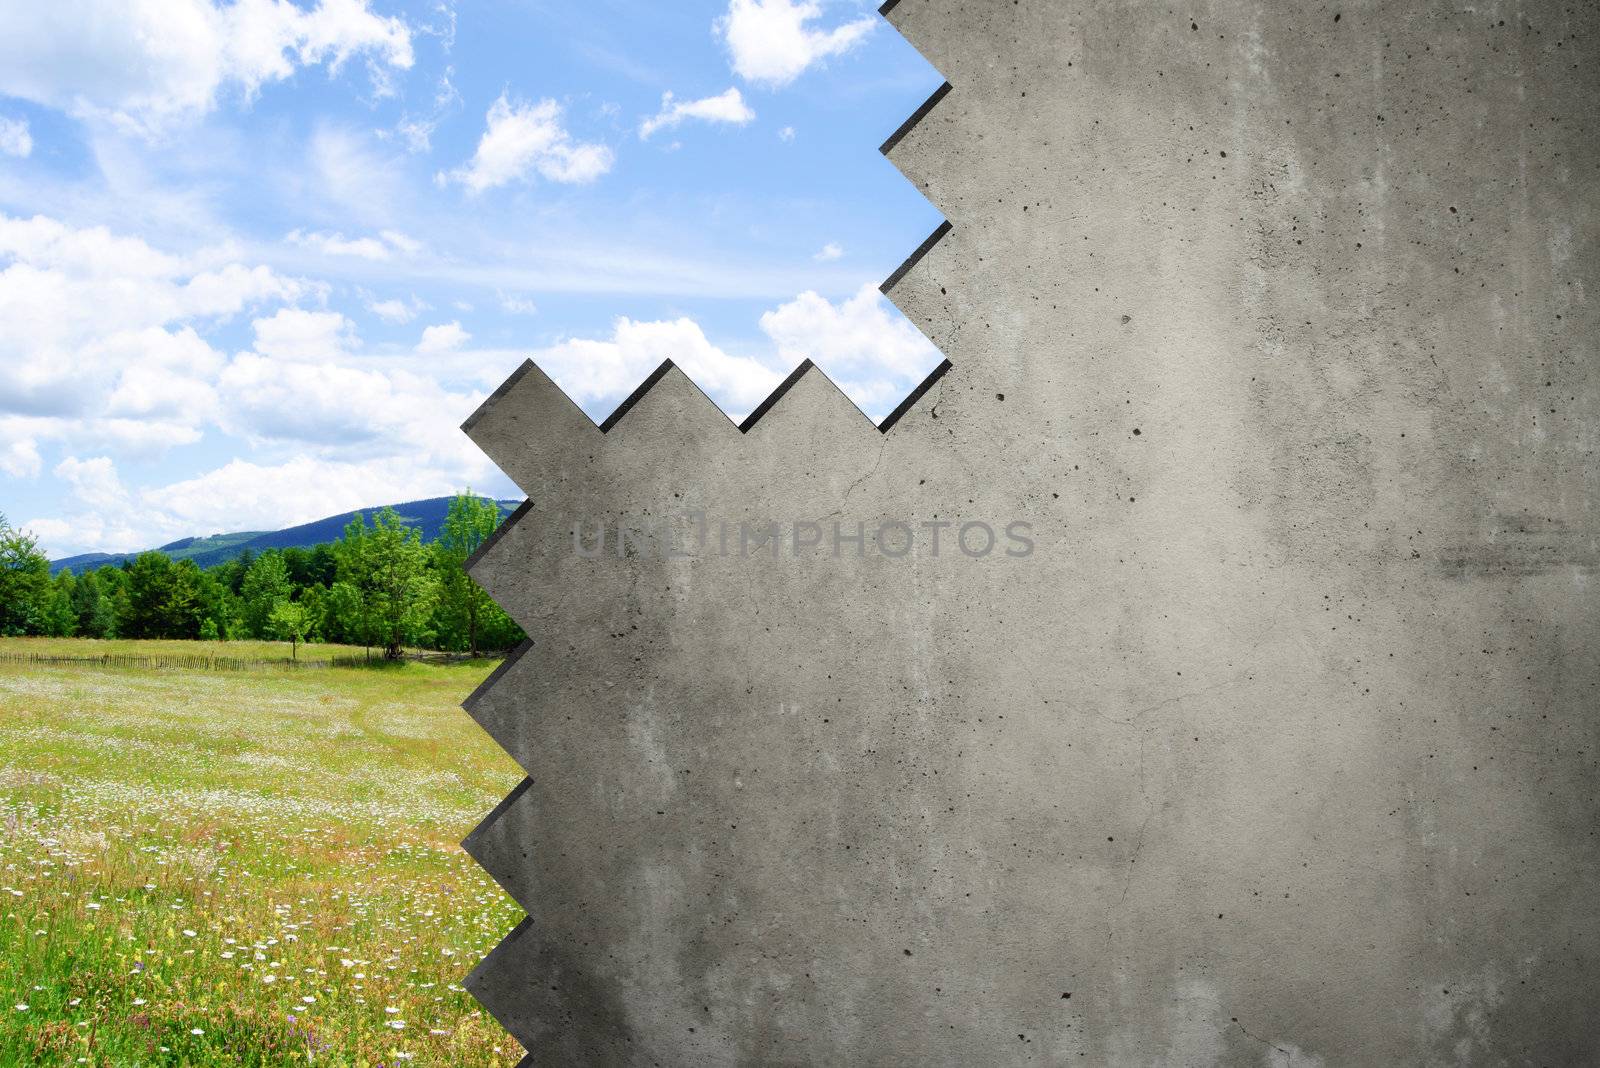 Background with nature and a concrete wall